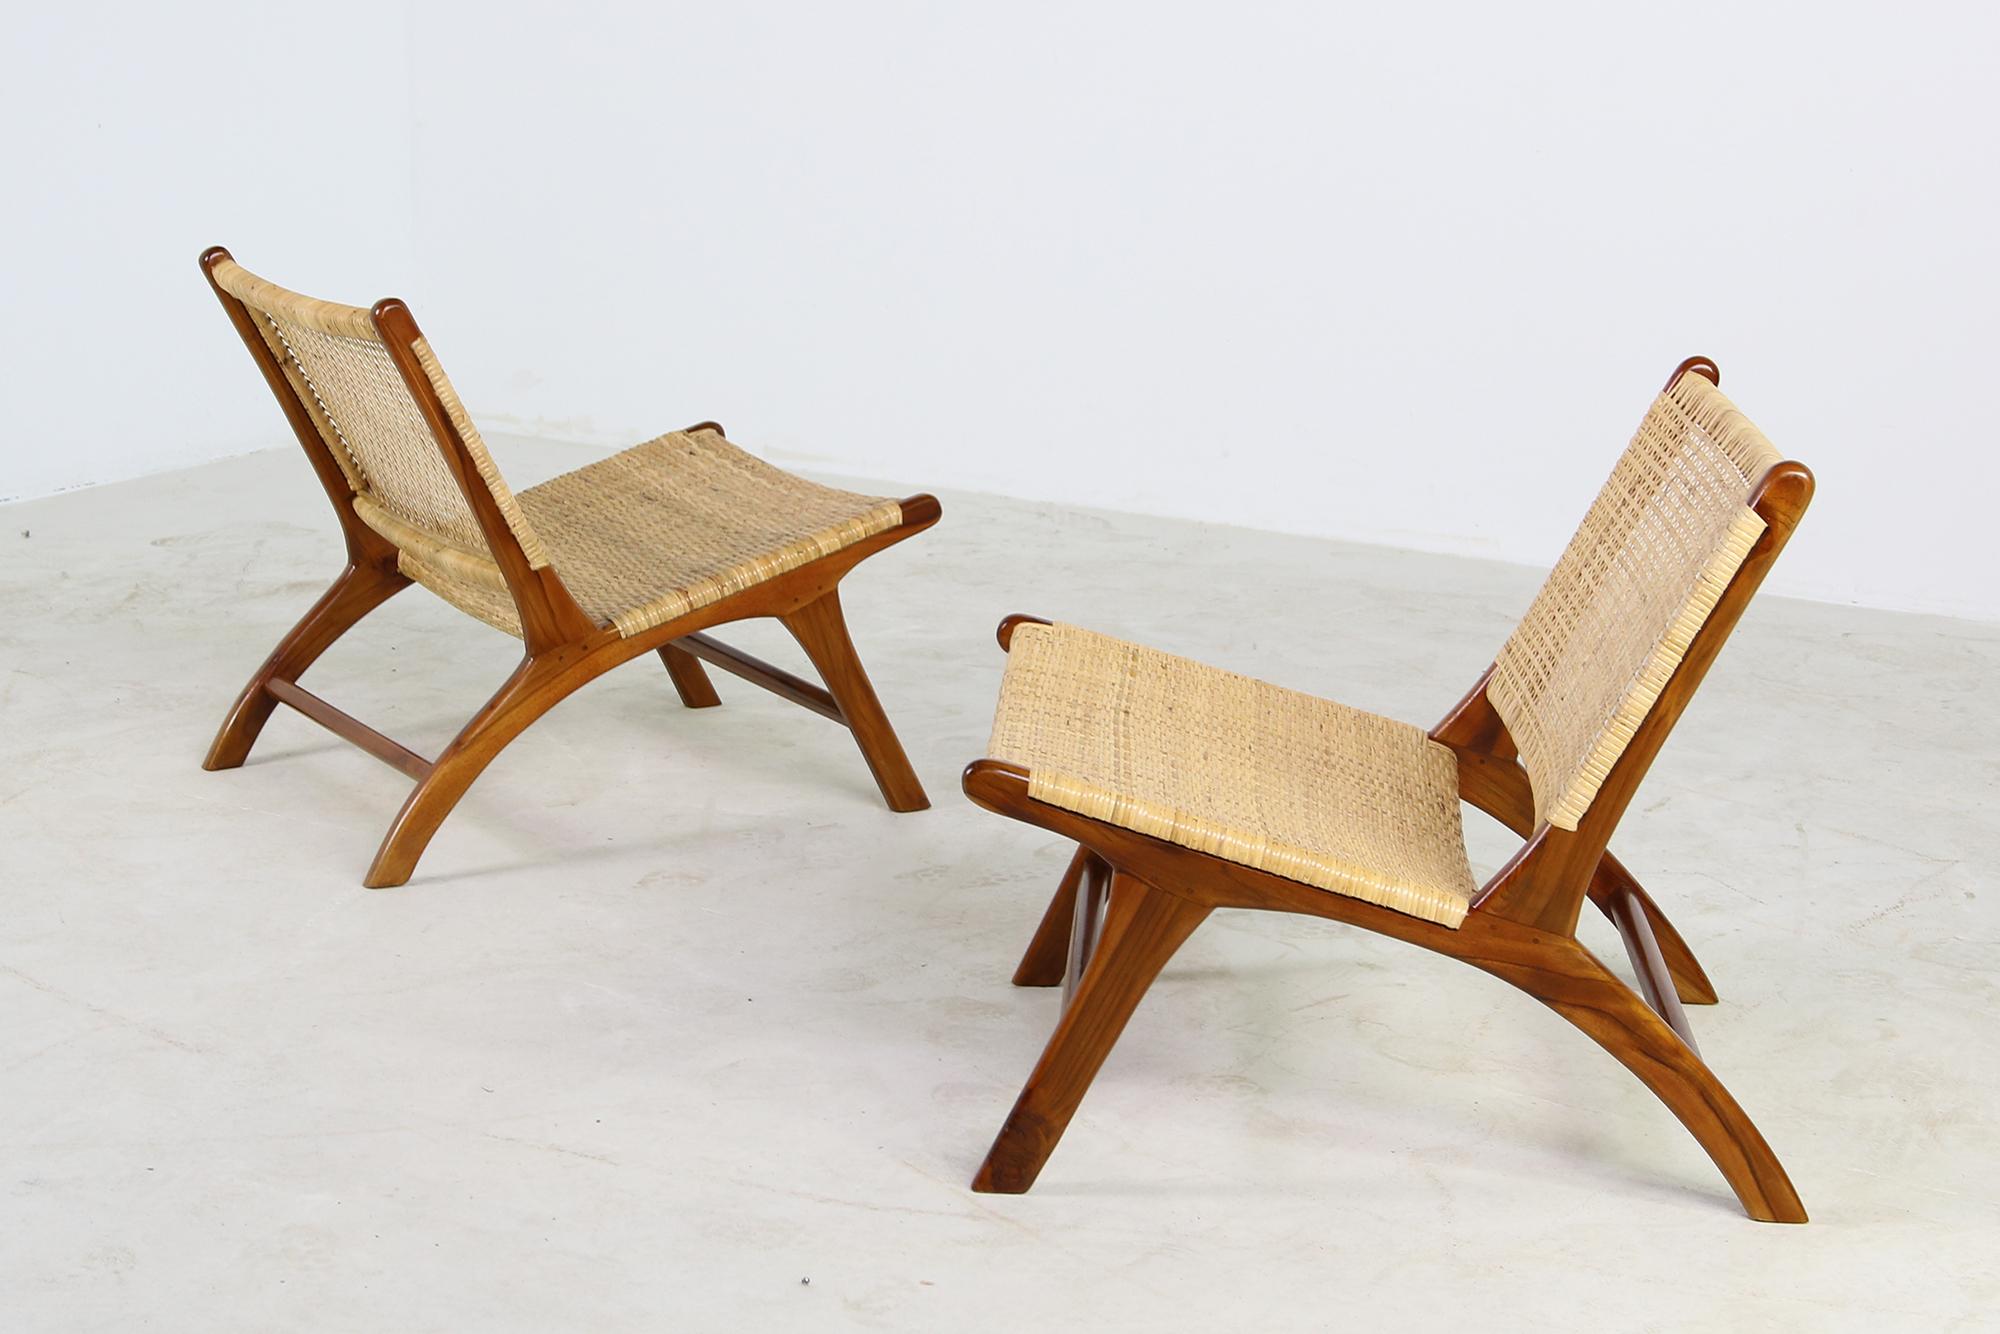 Contemporary Pair of Solid Teak and Cane Lounge Chairs, Brazilian & Midcentury Style, Modern